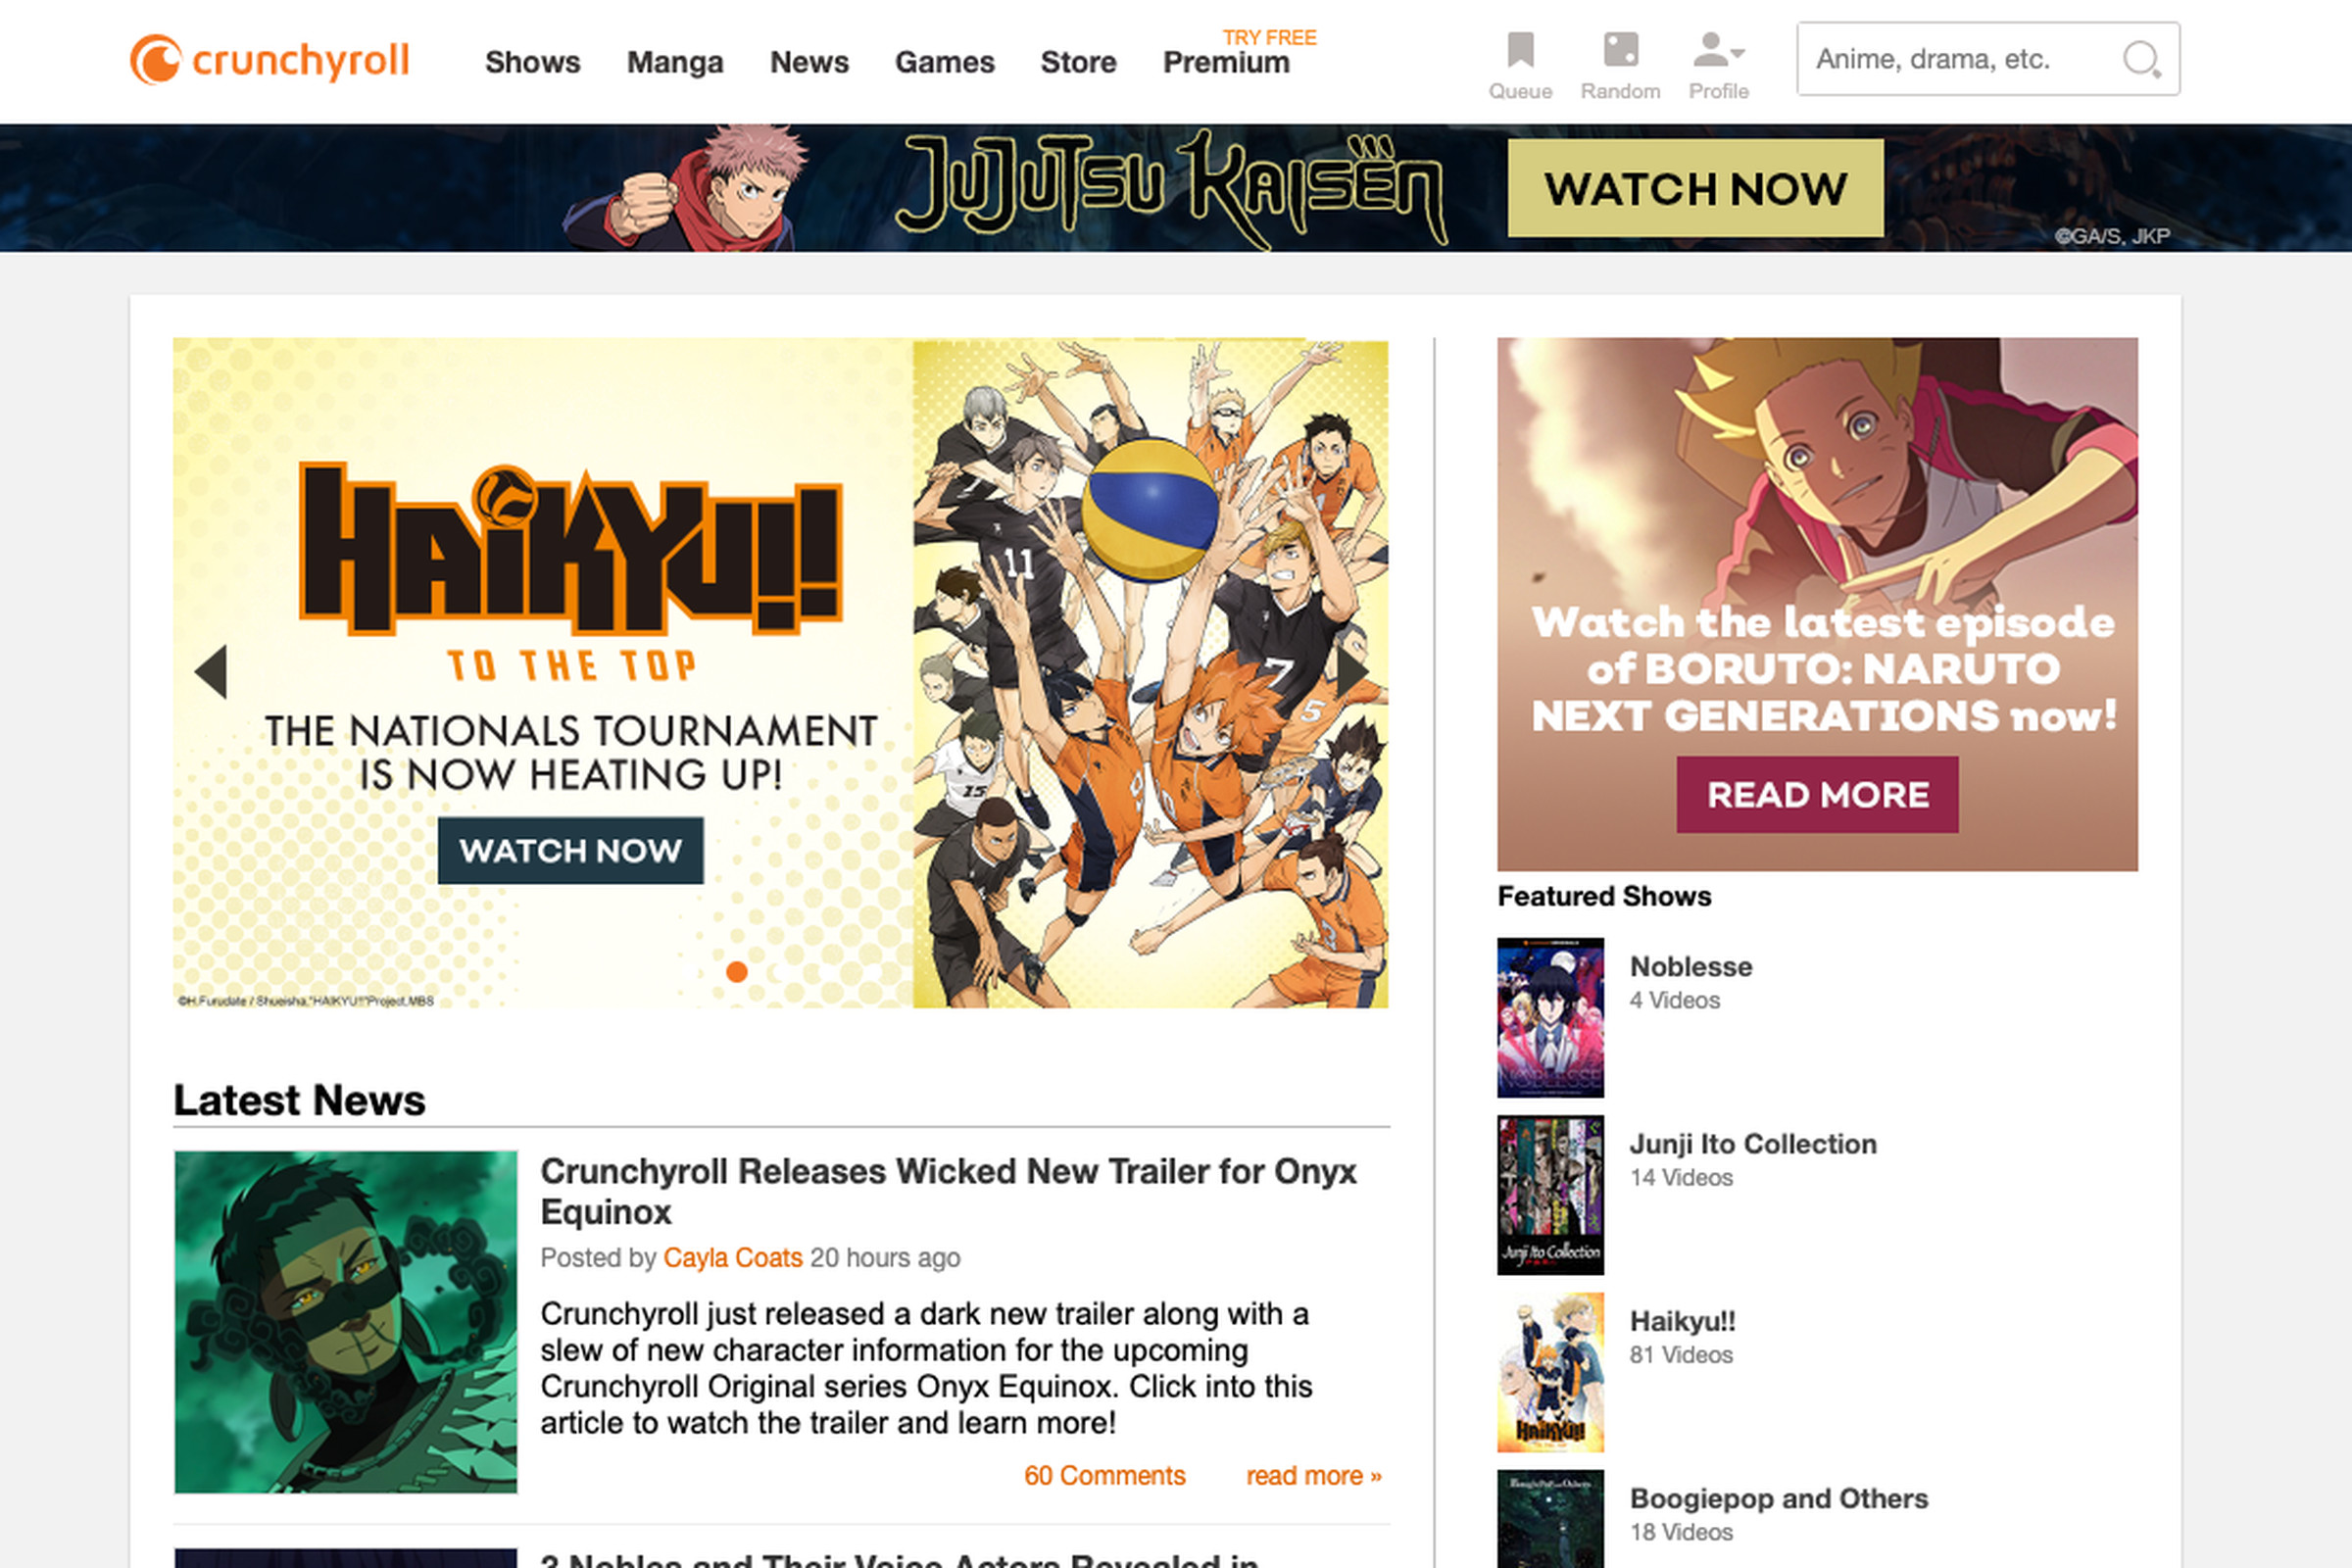 Crunchyroll has 70 million free members and some 3 million paying subscribers. 